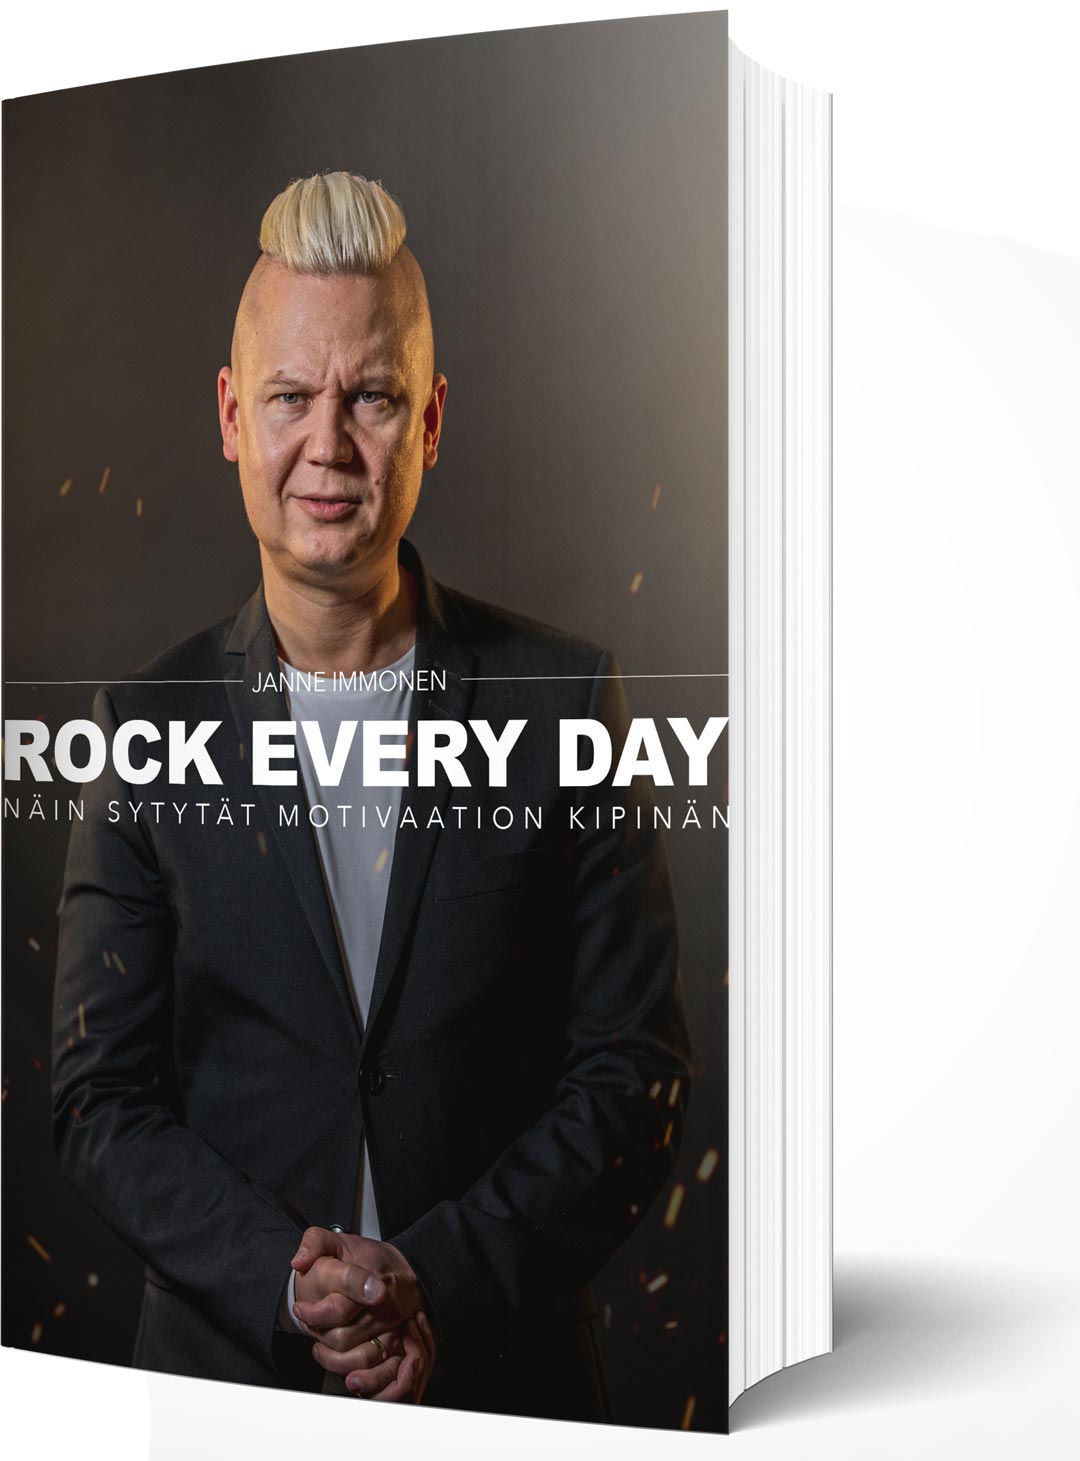 Rock Your Day - Rock Every Day kirja